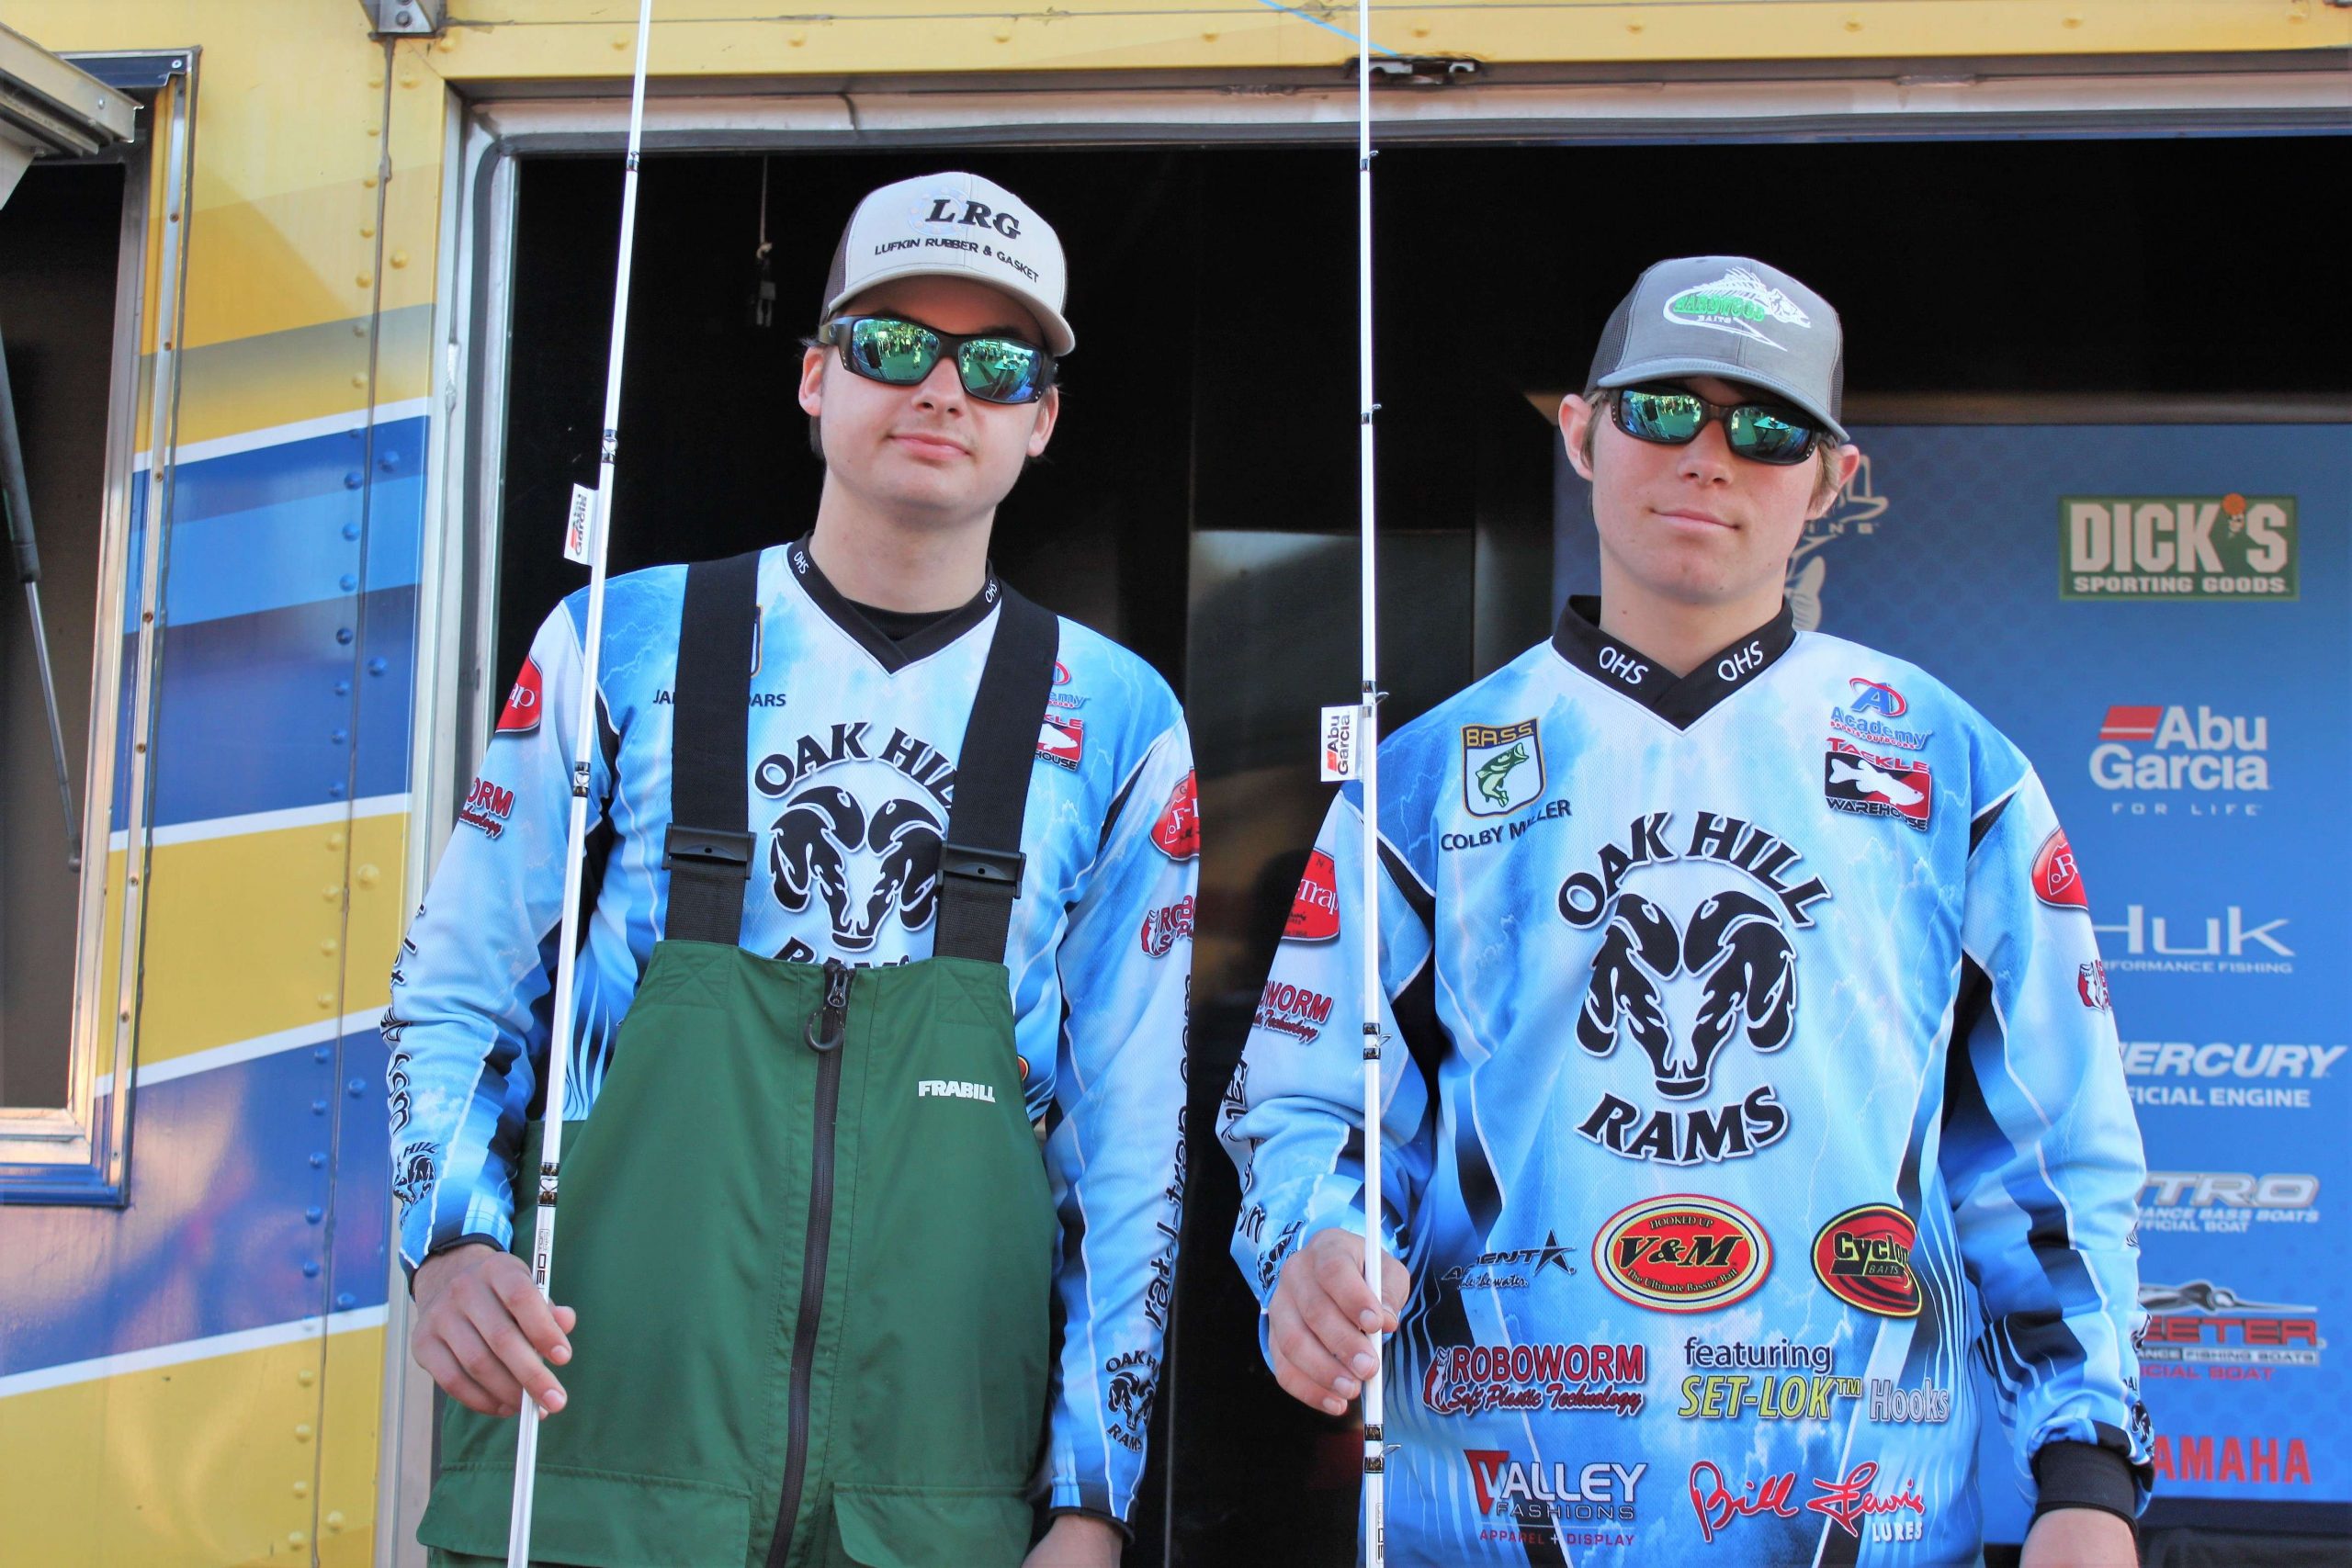 Miller and Cedars also got Abu Garcia rods for placing sixth of the 242 competing teams.